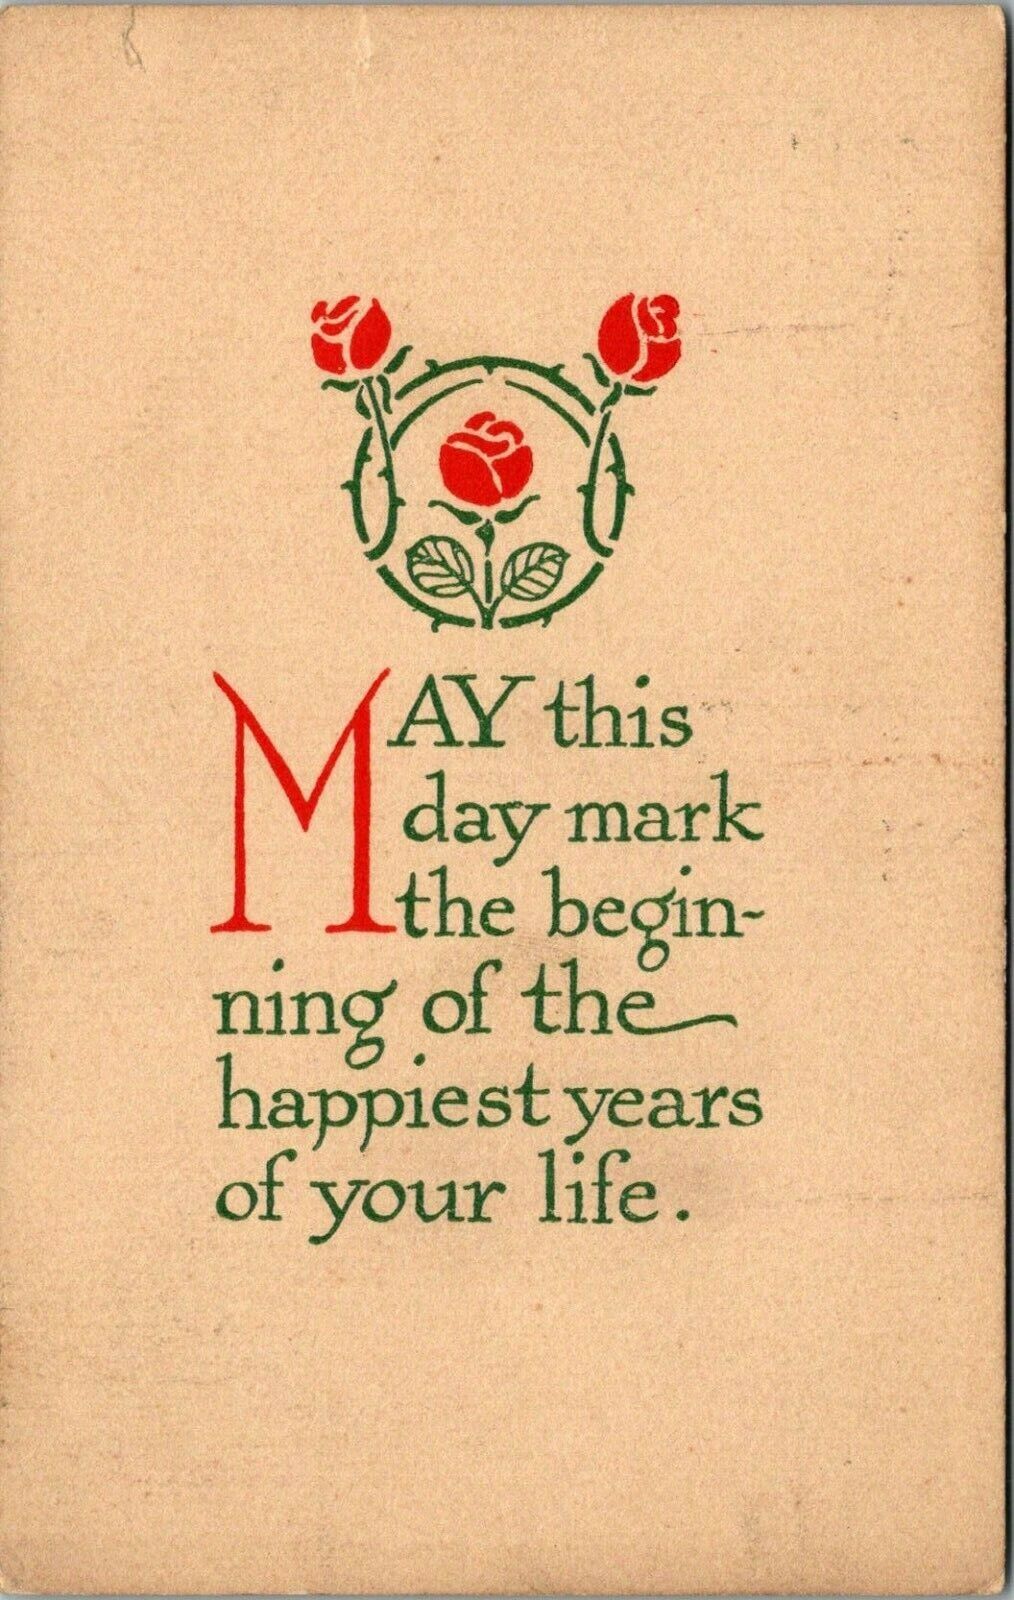 Vintage Postcard May This Day Mark The Beginning of the Happiest Years